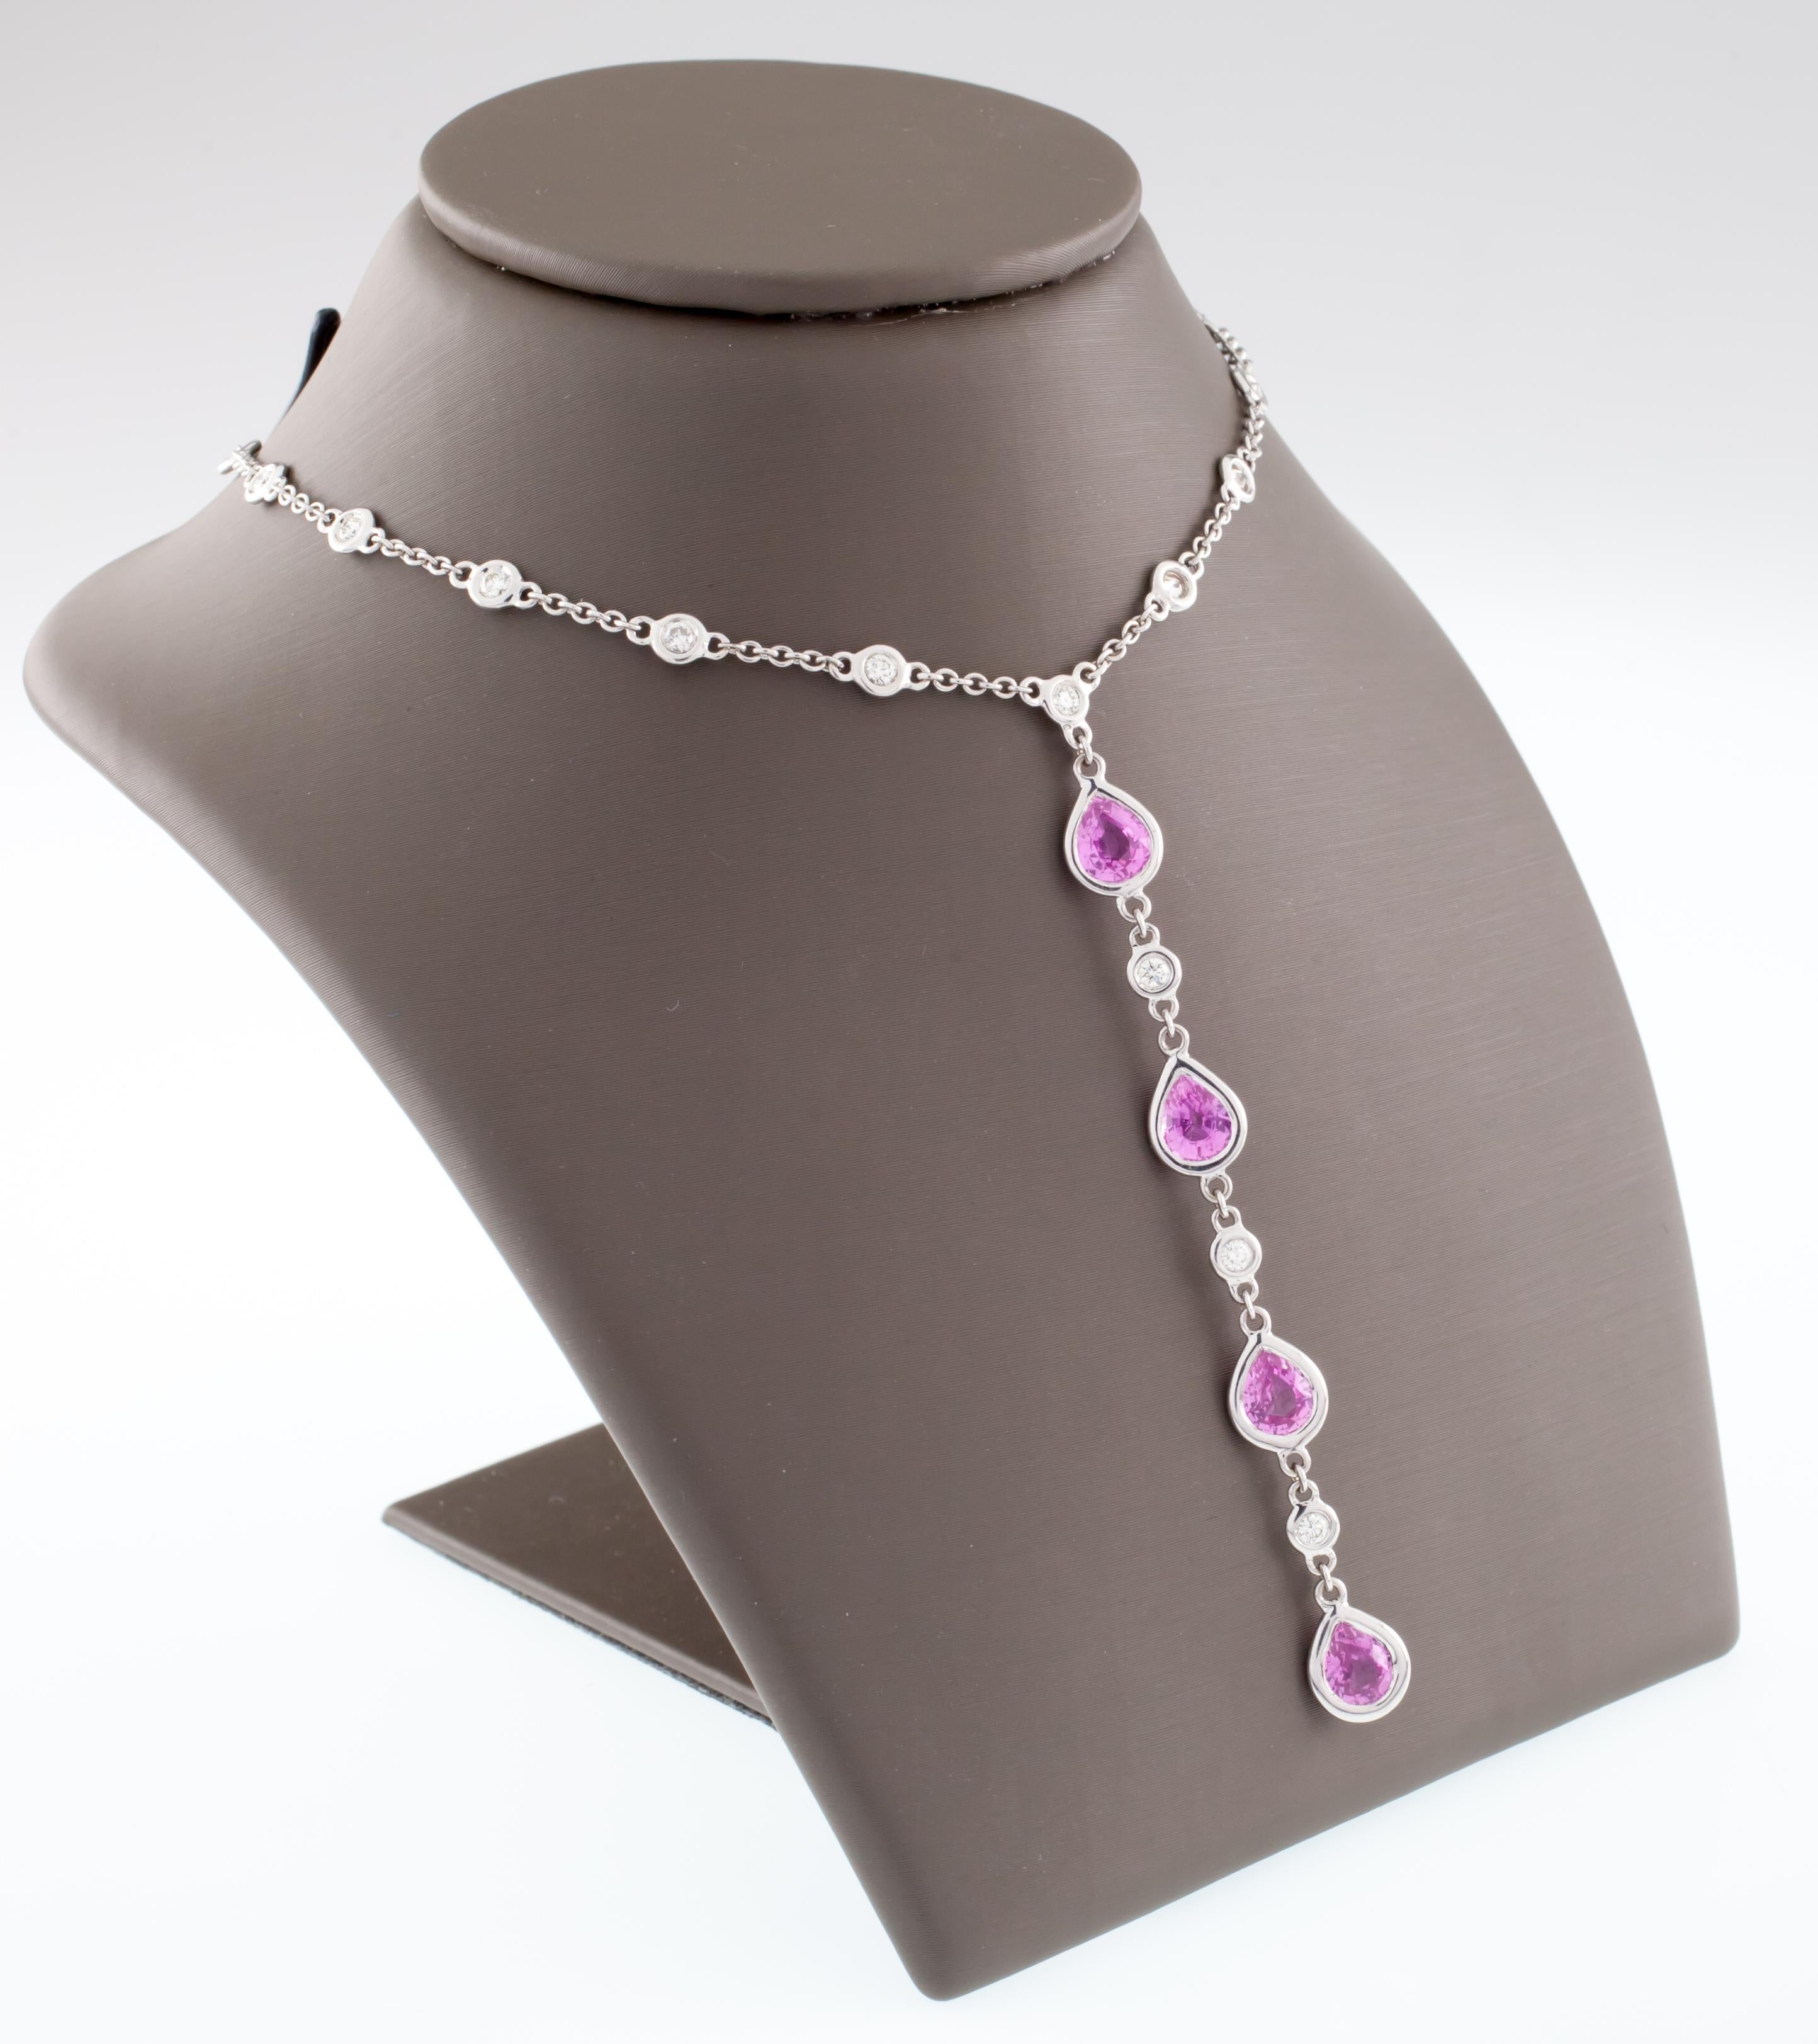 Modern 4.2 Carat Diamond and Pink Sapphire White Gold Necklace with Drop Pendant